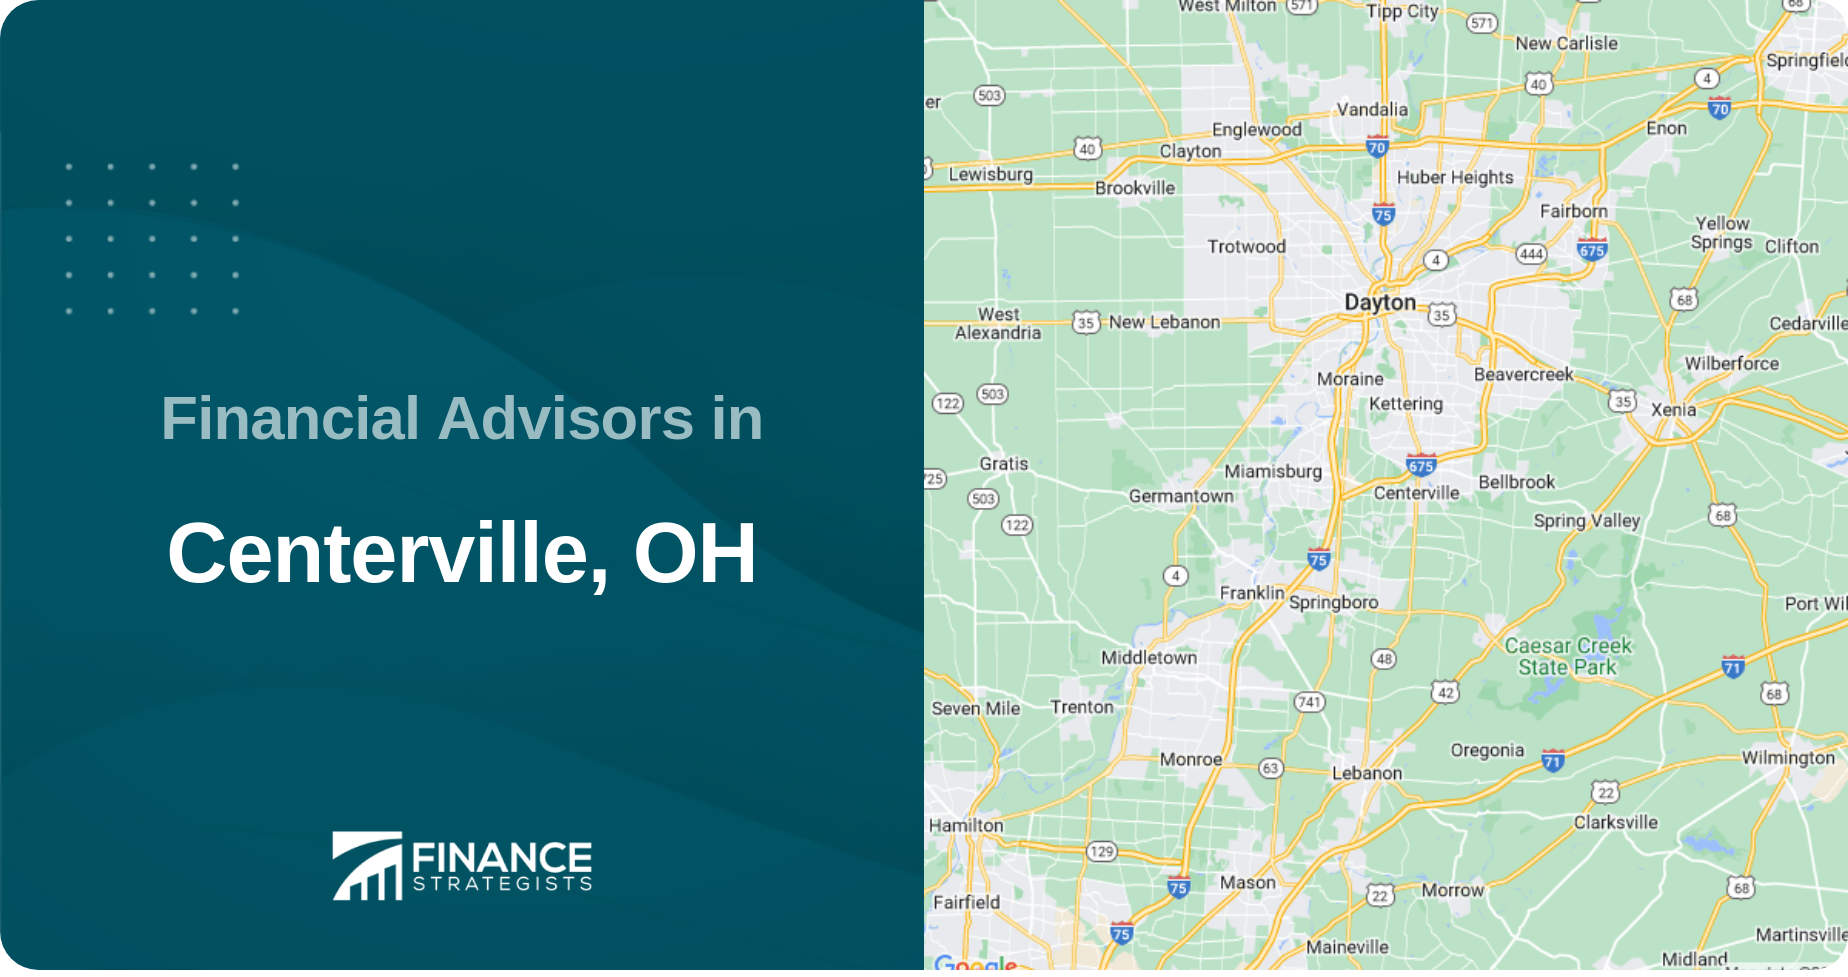 Financial Advisors in Centerville, OH